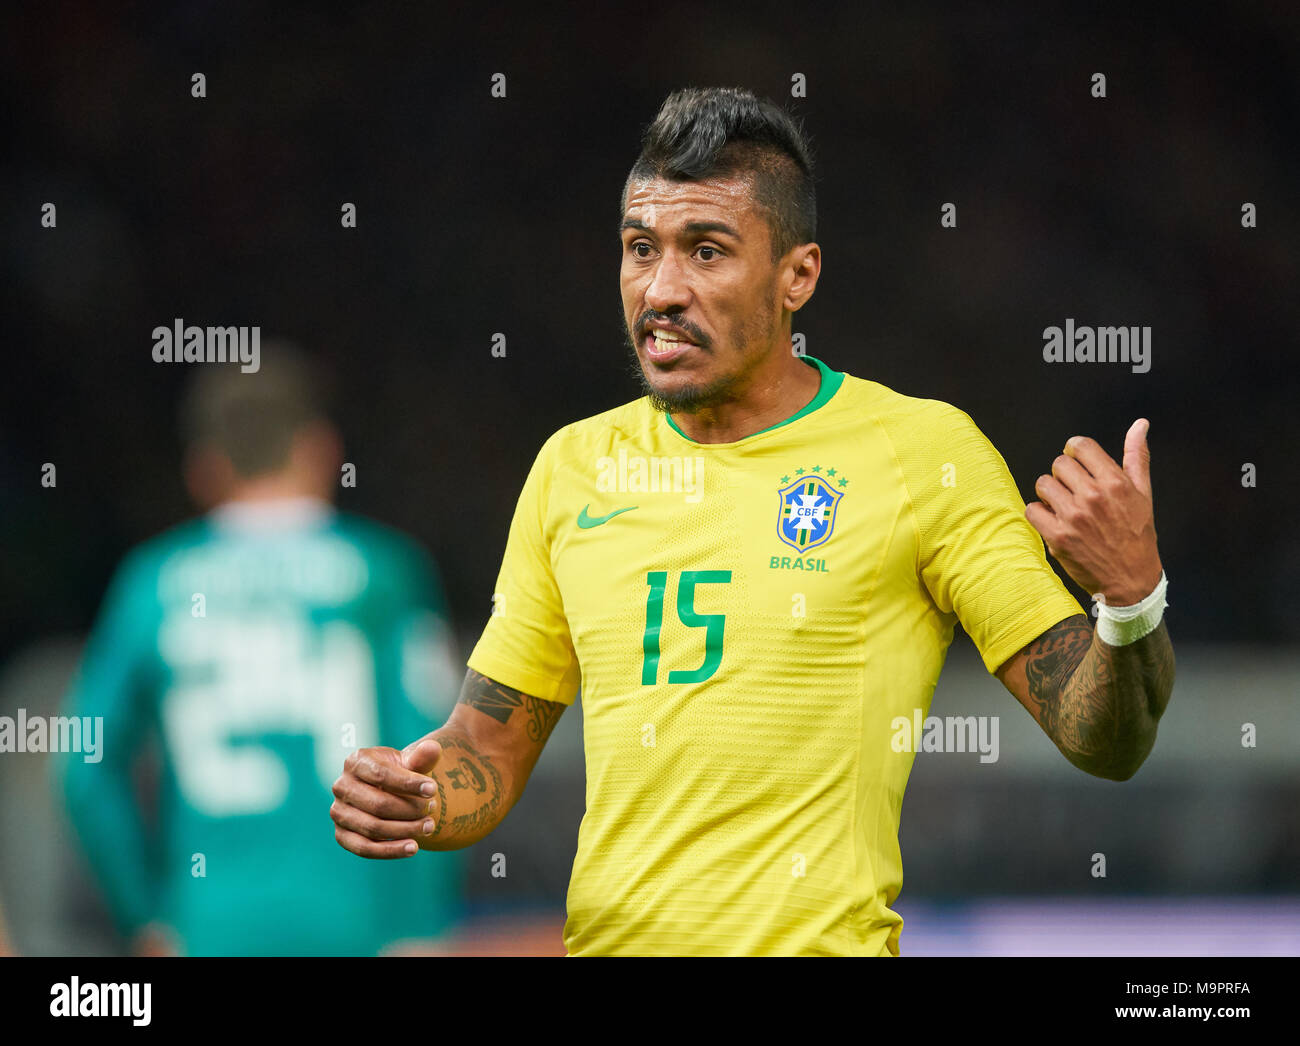 Berlin, Germany. 27th Mar, 2018. DFB-ESP Football Test, Berlin, March 27, 2018 PAULINHO, BRA 15  Gesticulates and giving instructions, action, single image, gesture, gesture, hand movement, pointing, interpret, mimik,  GERMANY - BRASIL 0-1 Soccer World Cup Russia Test match , Berlin, March 27, 2018,  Season 2017/2018  © Peter Schatz / Alamy Live News Stock Photo